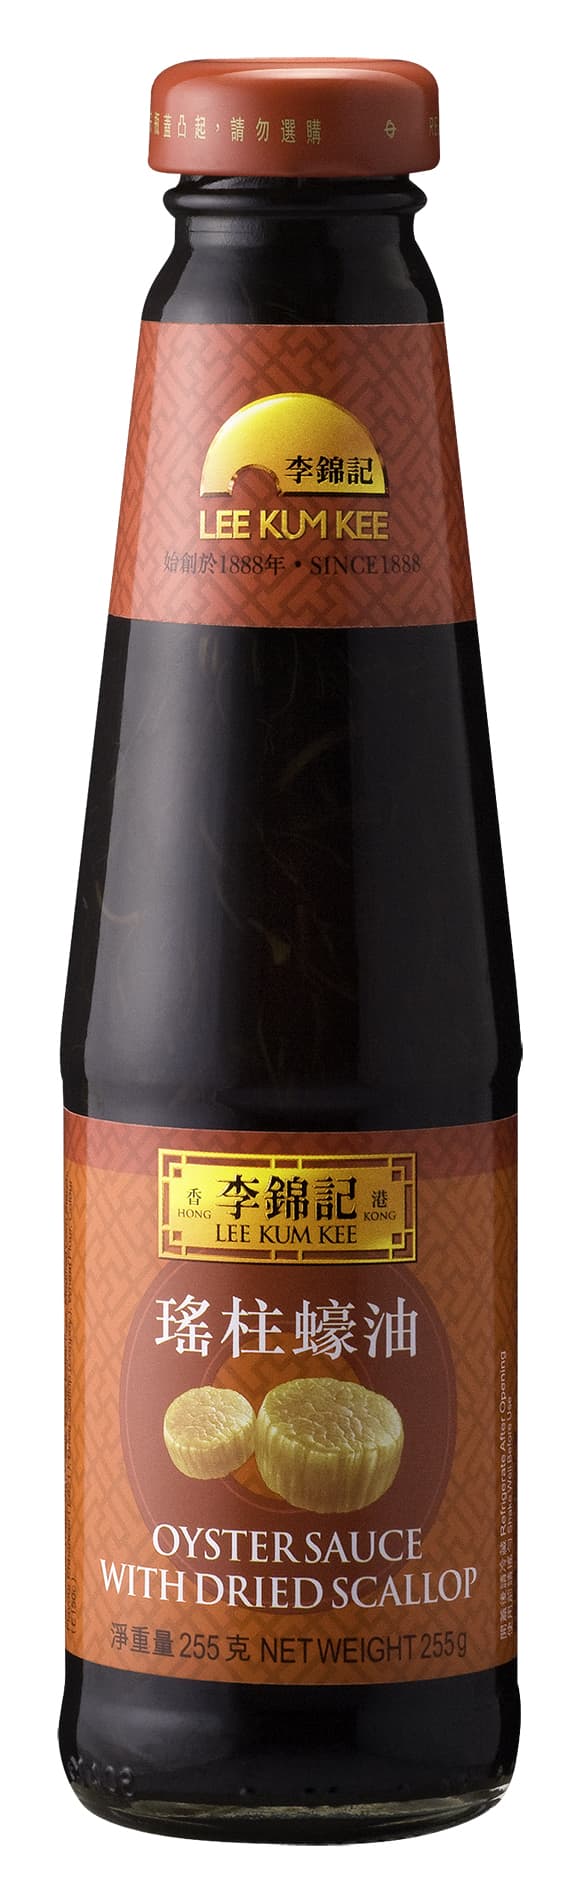 Oyster Sauce with Dried Scallop 255g b